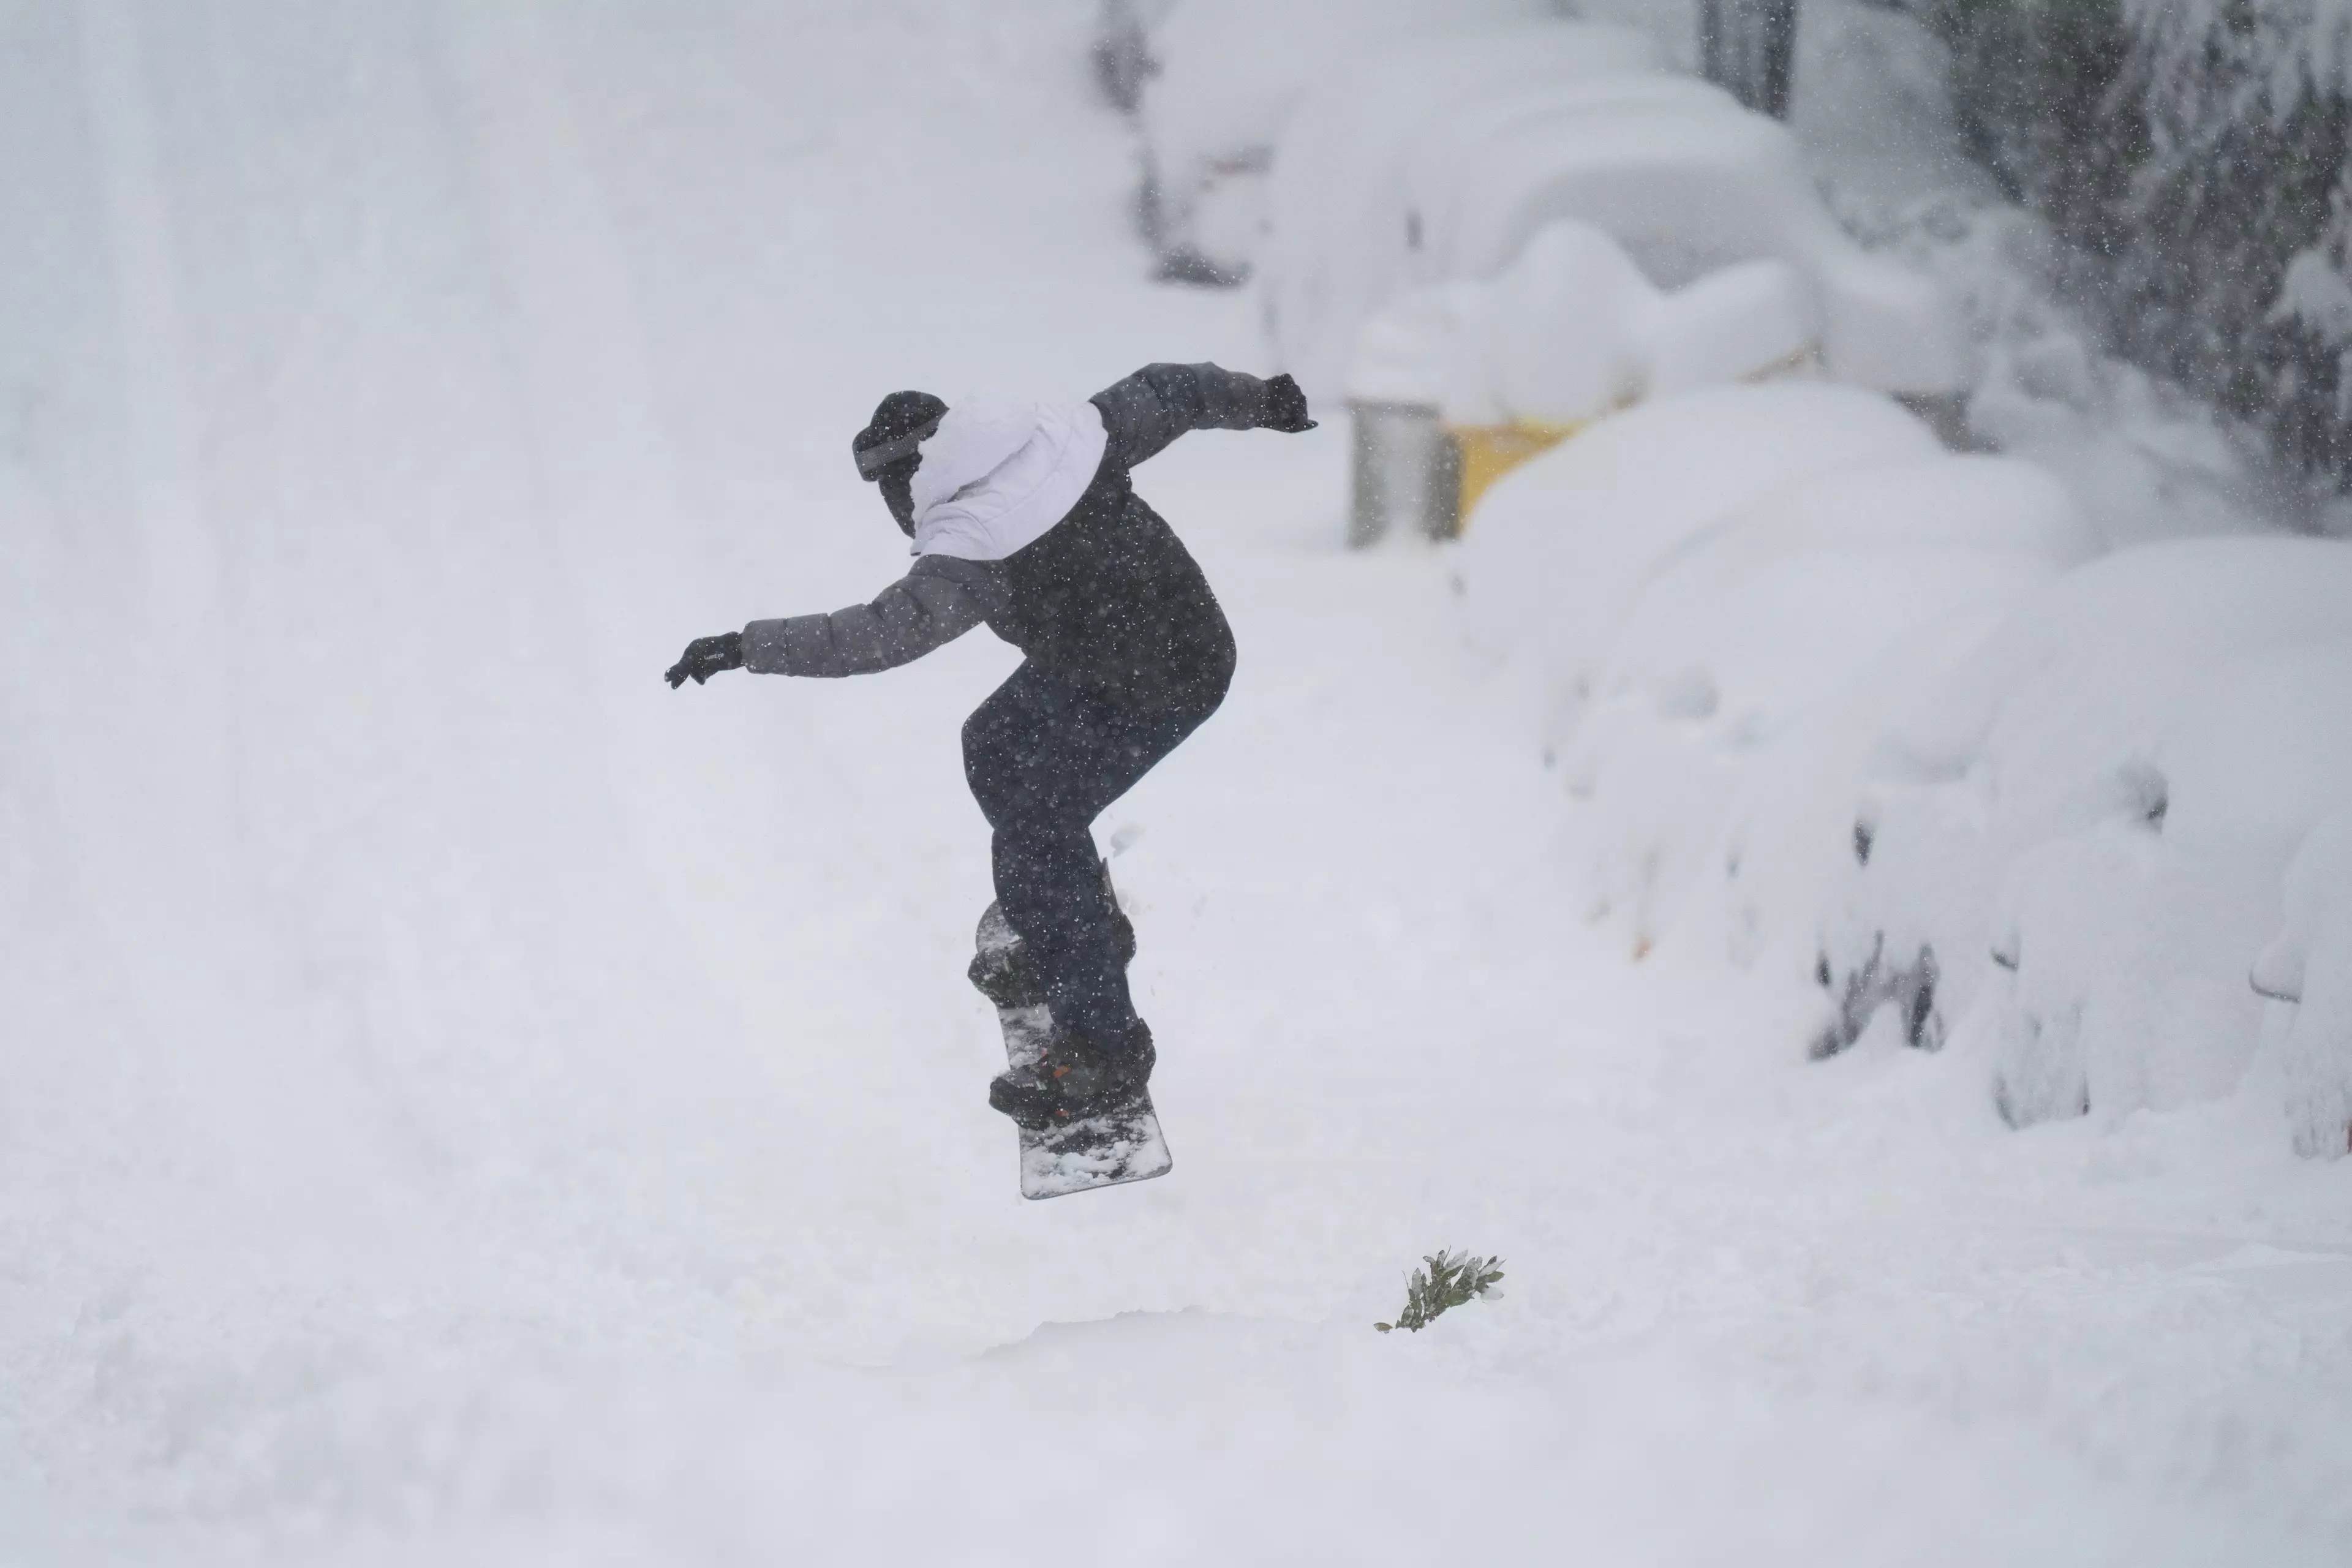 A man riding a snowboard in Madrid on Saturday (9 January).